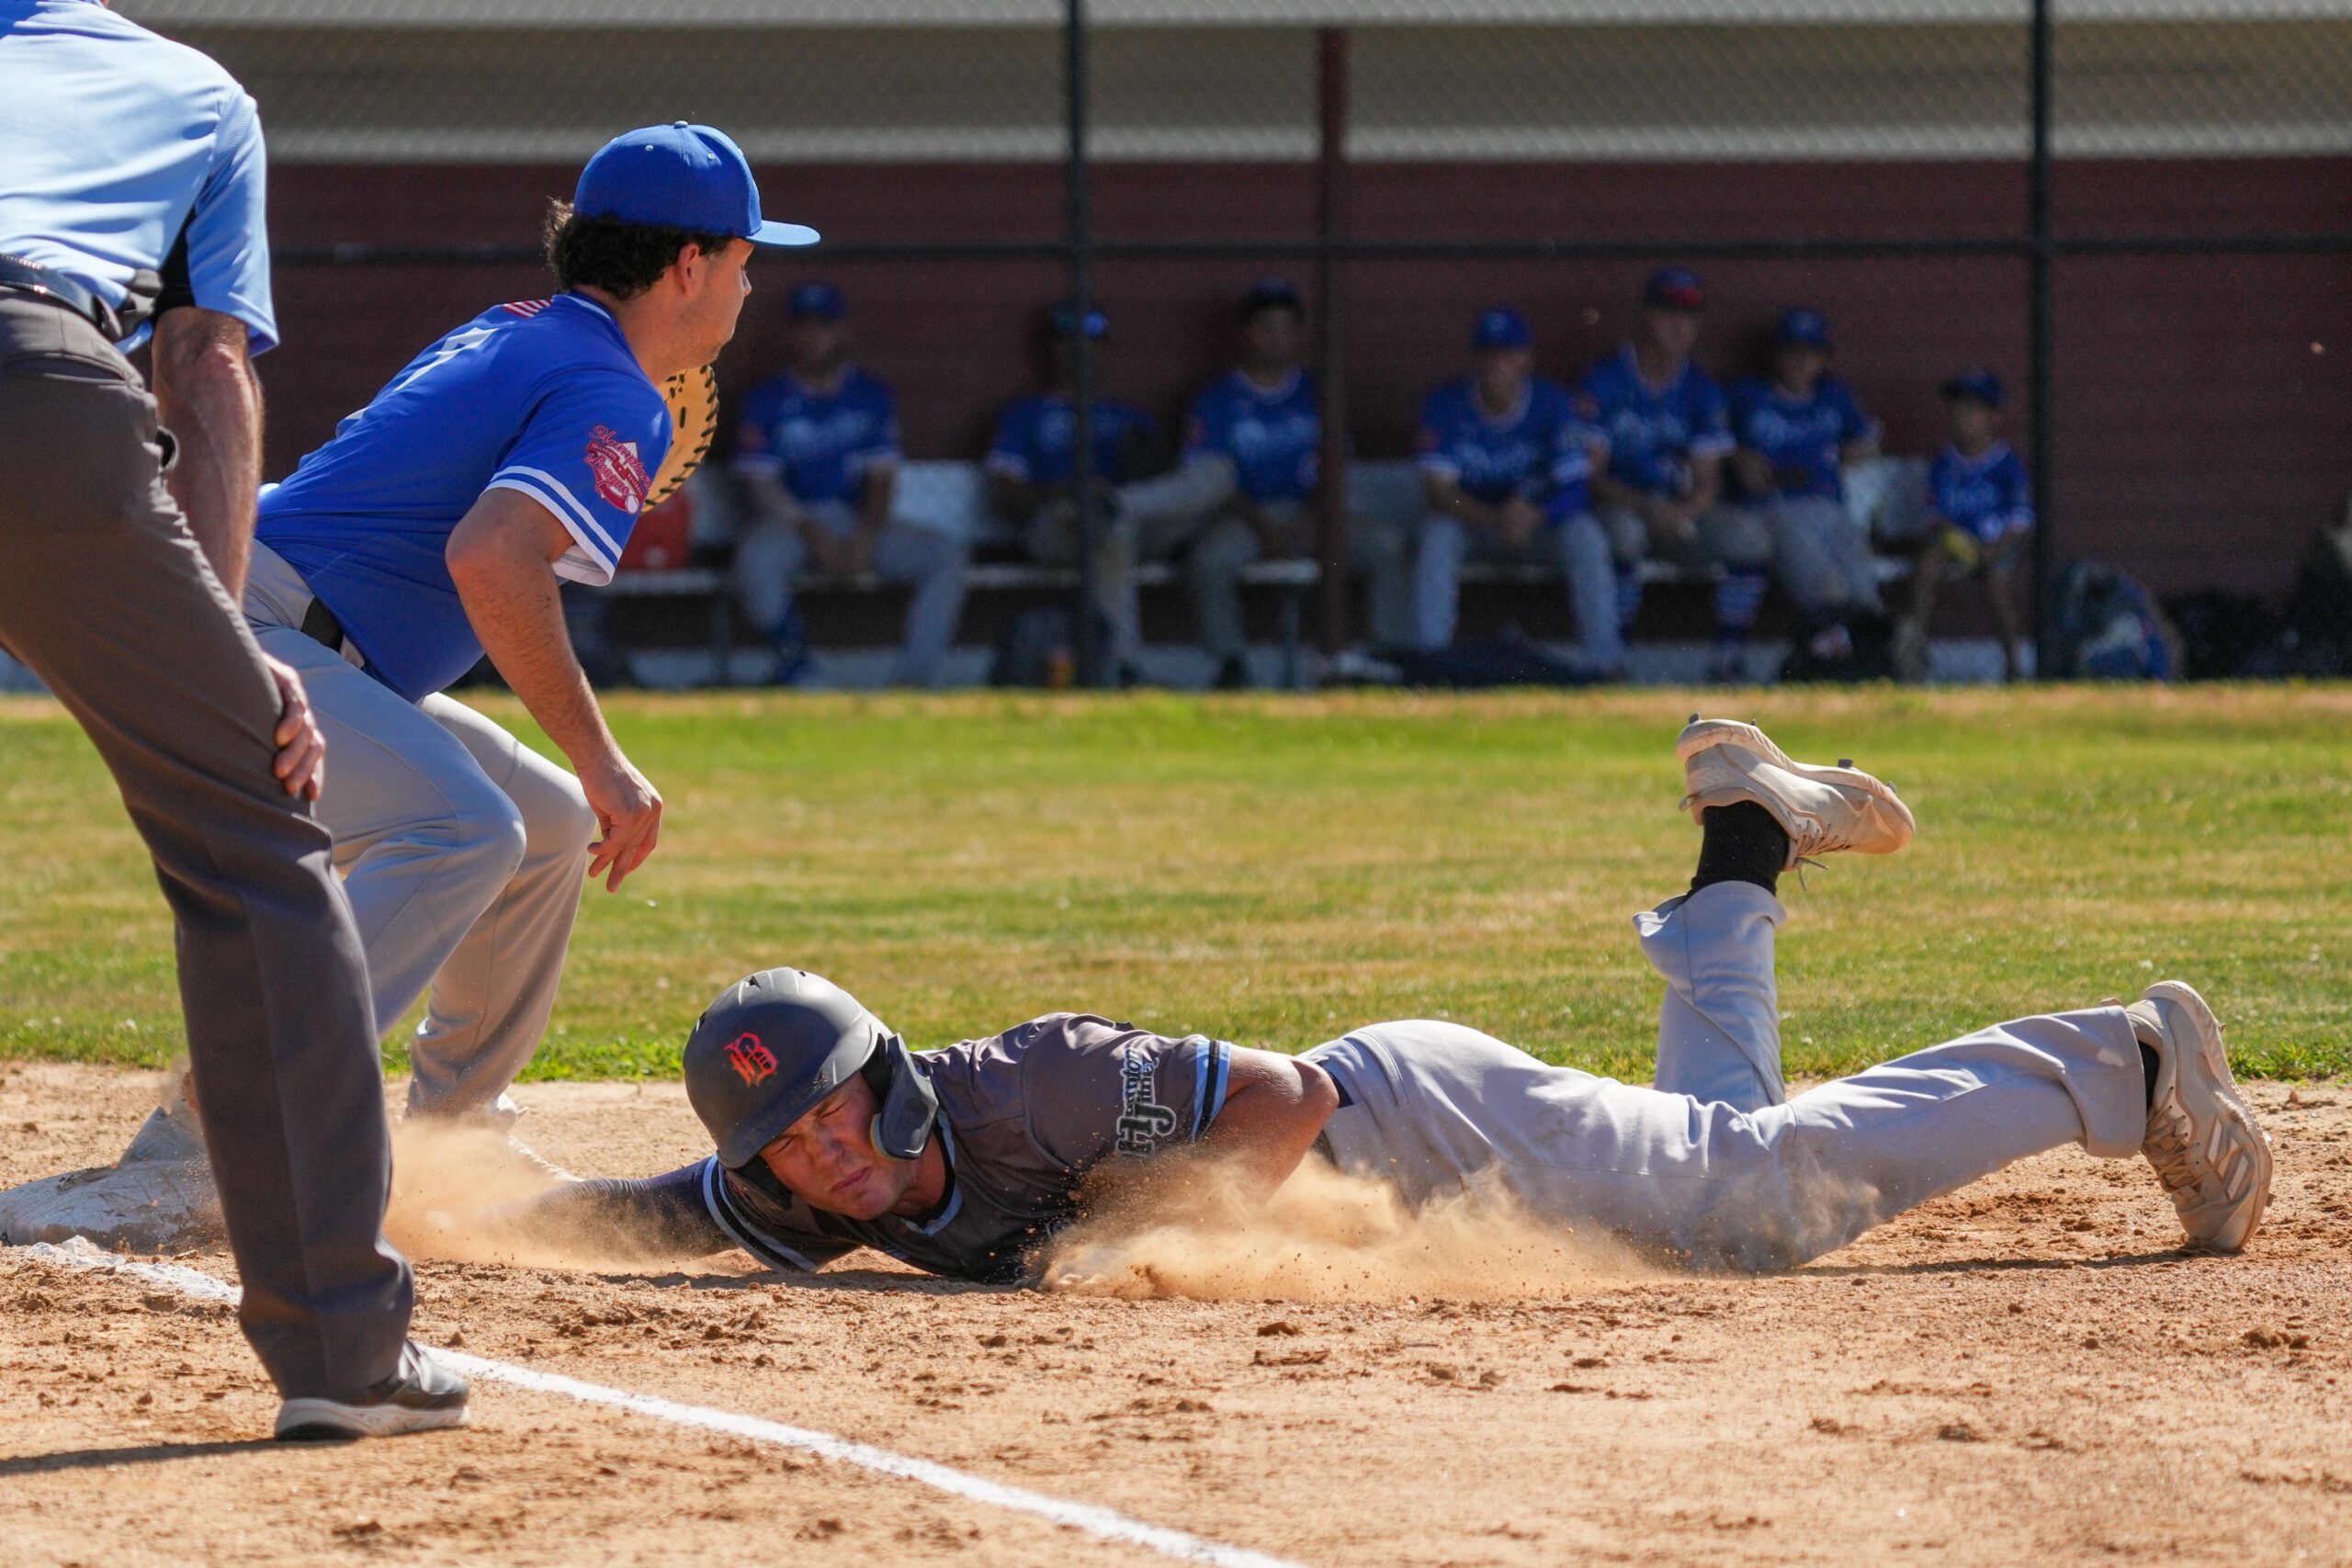 A Sag Harbor Whaler dives back to first base during a pickoff attempt.    RON ESPOSITO